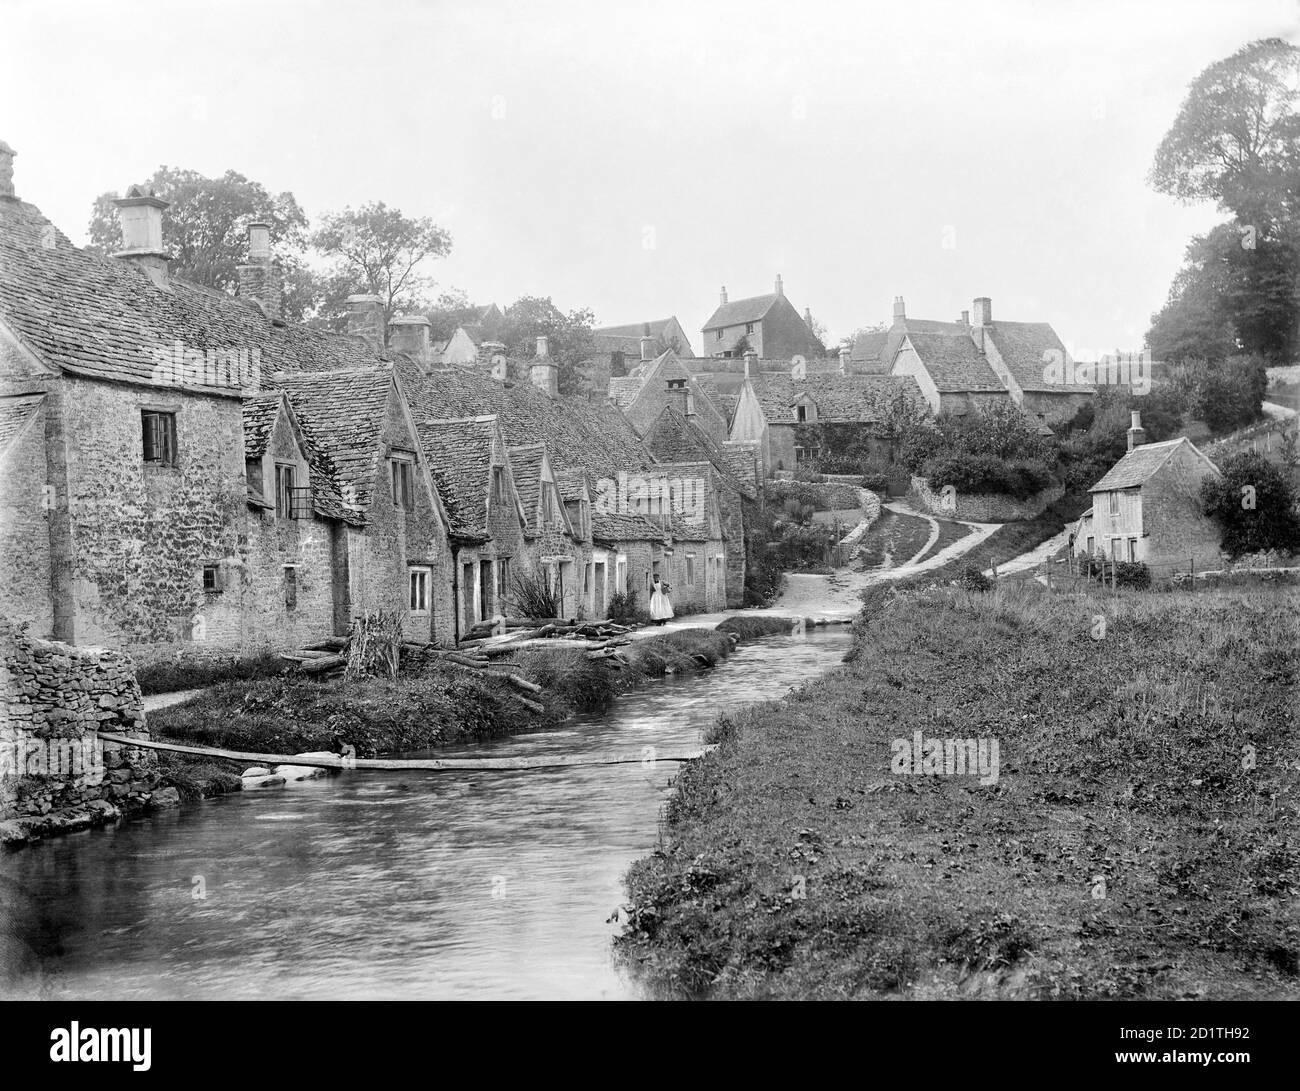 ARLINGTON ROW, Bibury, Gloucestershire. Looking up the well-known row of Cotswold stone cottages on the river Coln. These were converted into dwellings in the early 17th century from a monastic sheephouse dating to c.1380 with ten bays of cruck trusses. Photographed in 1901 by Henry Taunt. Stock Photo